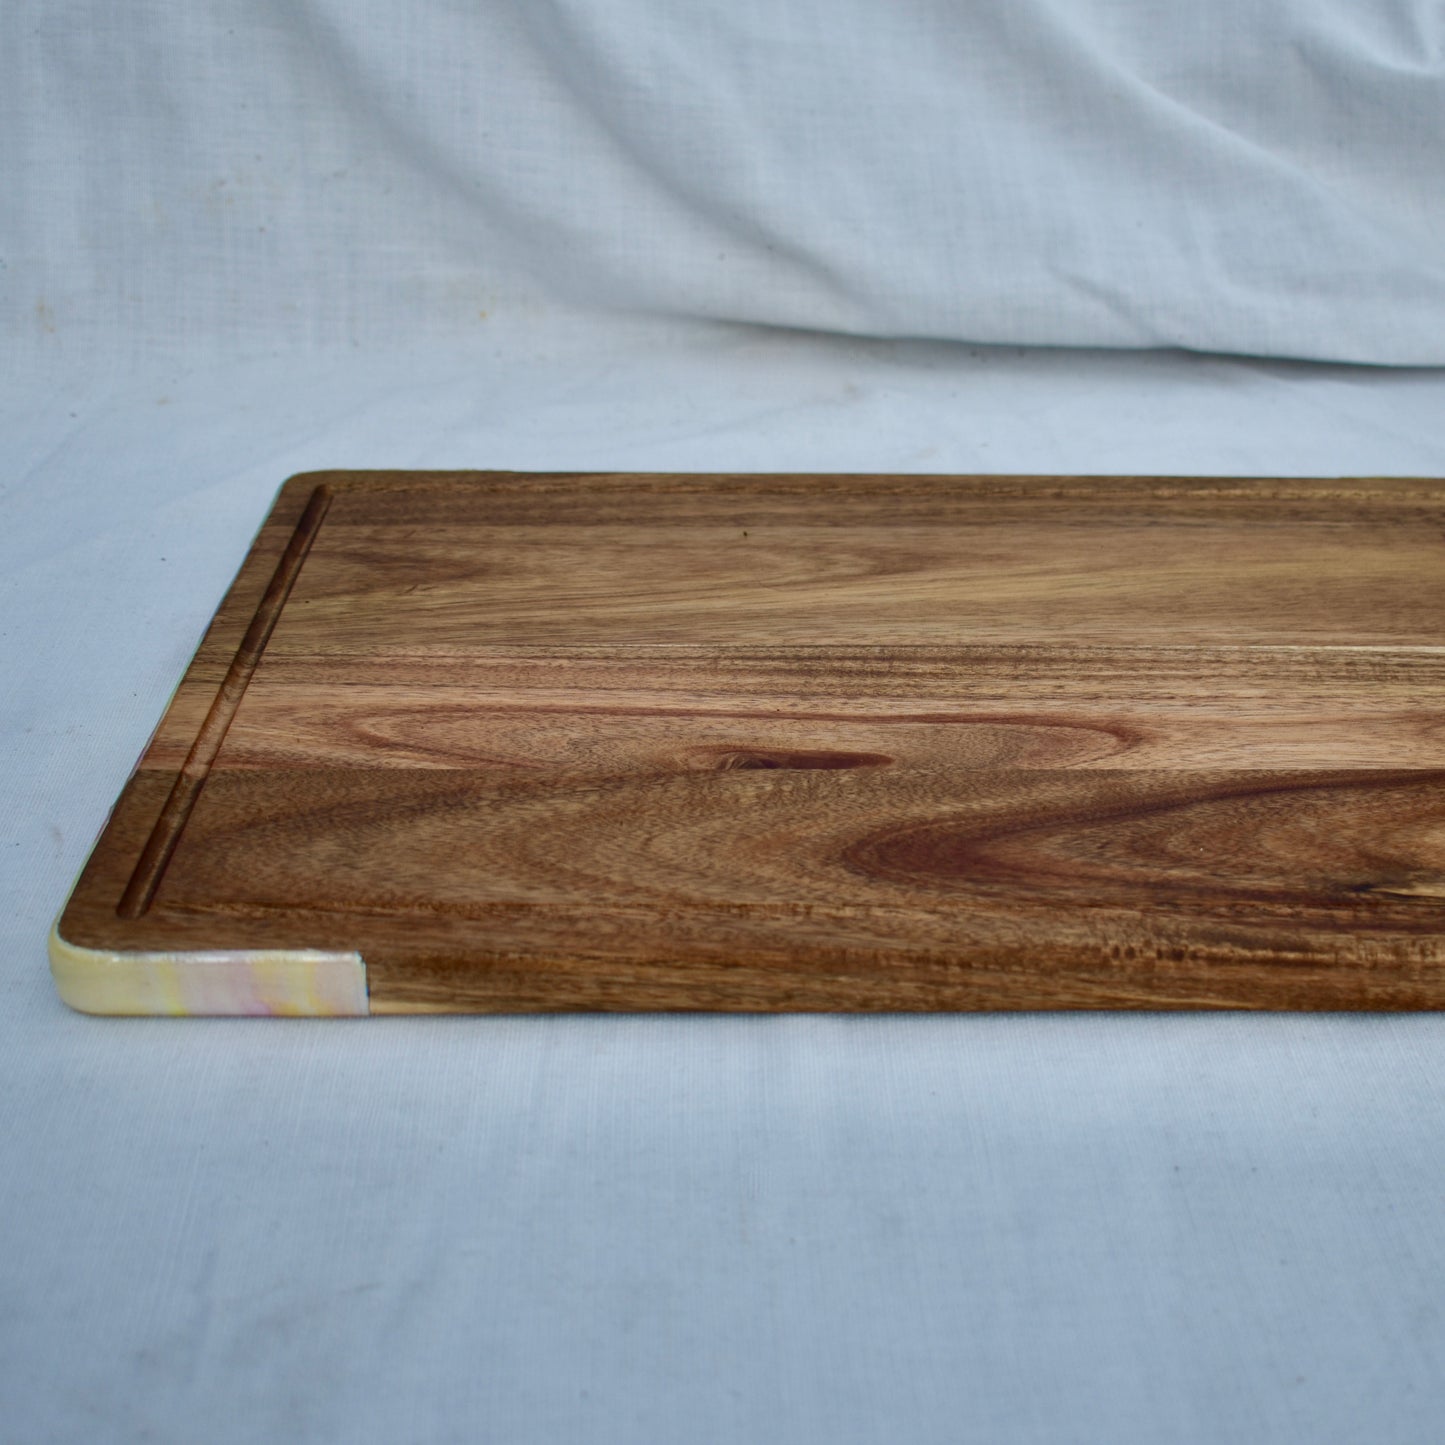 6-Piece Charcuterie Board Serving Set • Reversible Acacia Wood Charcuterie Board